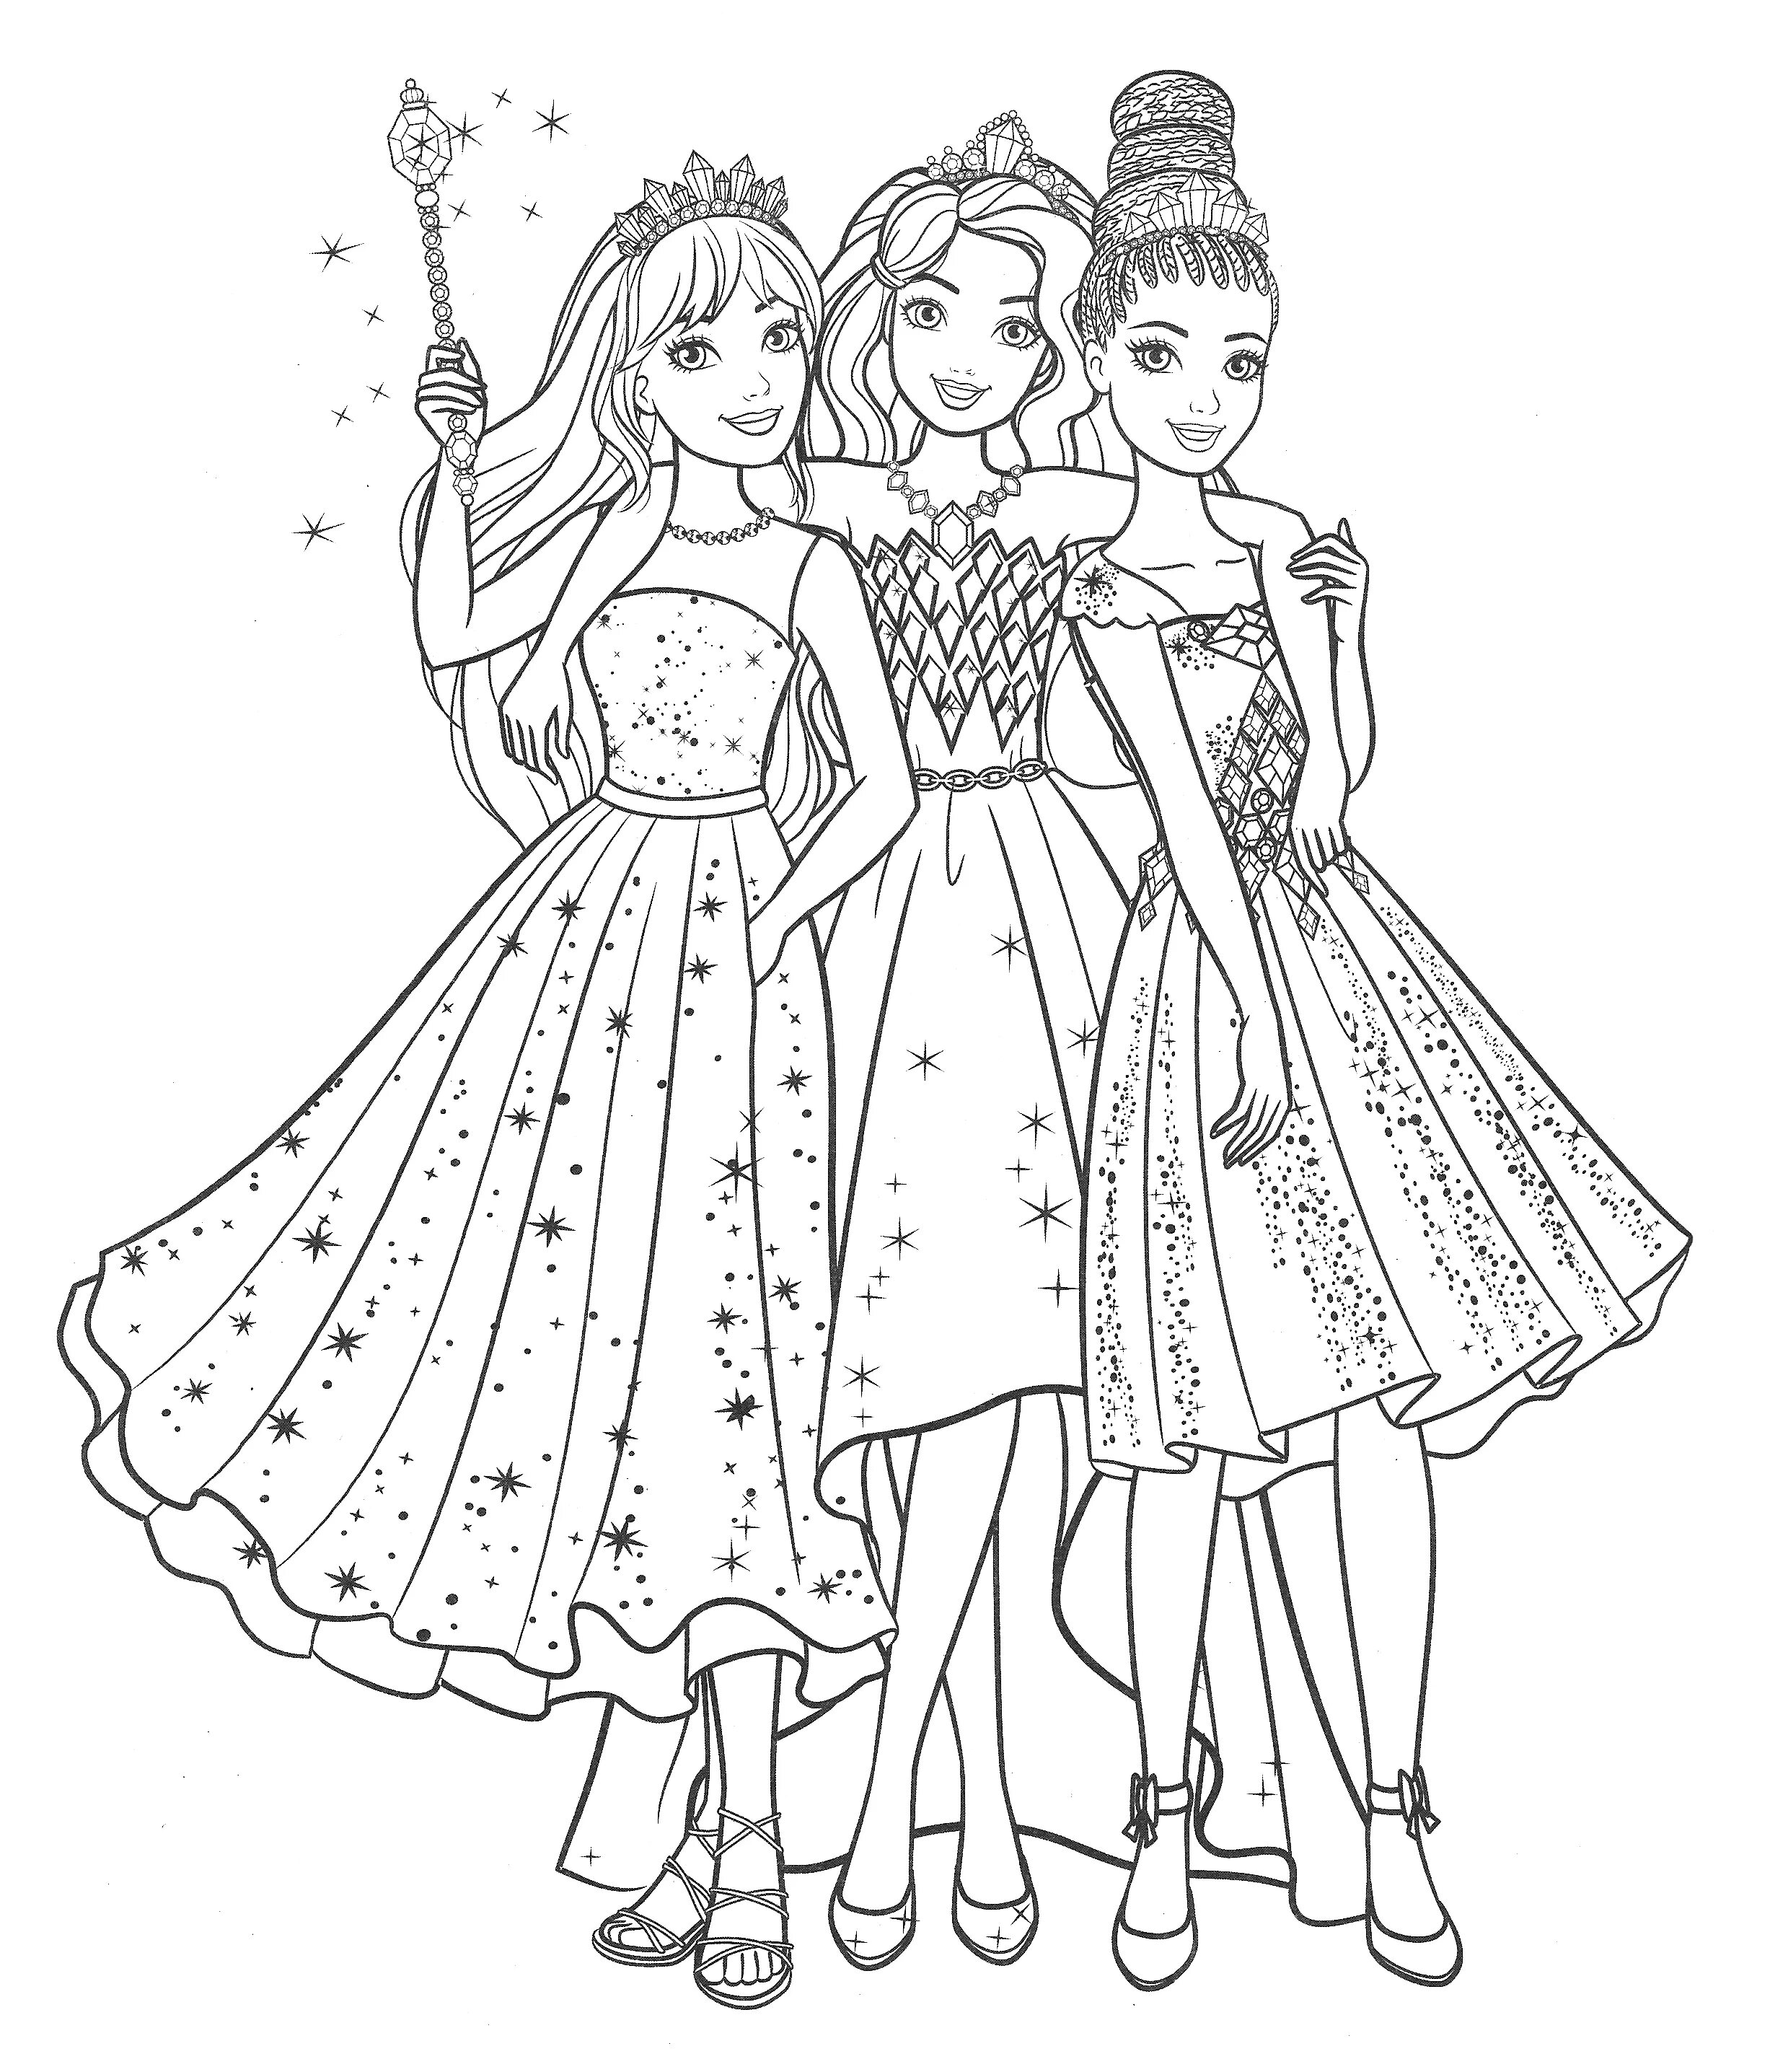 Chelsea doll coloring page